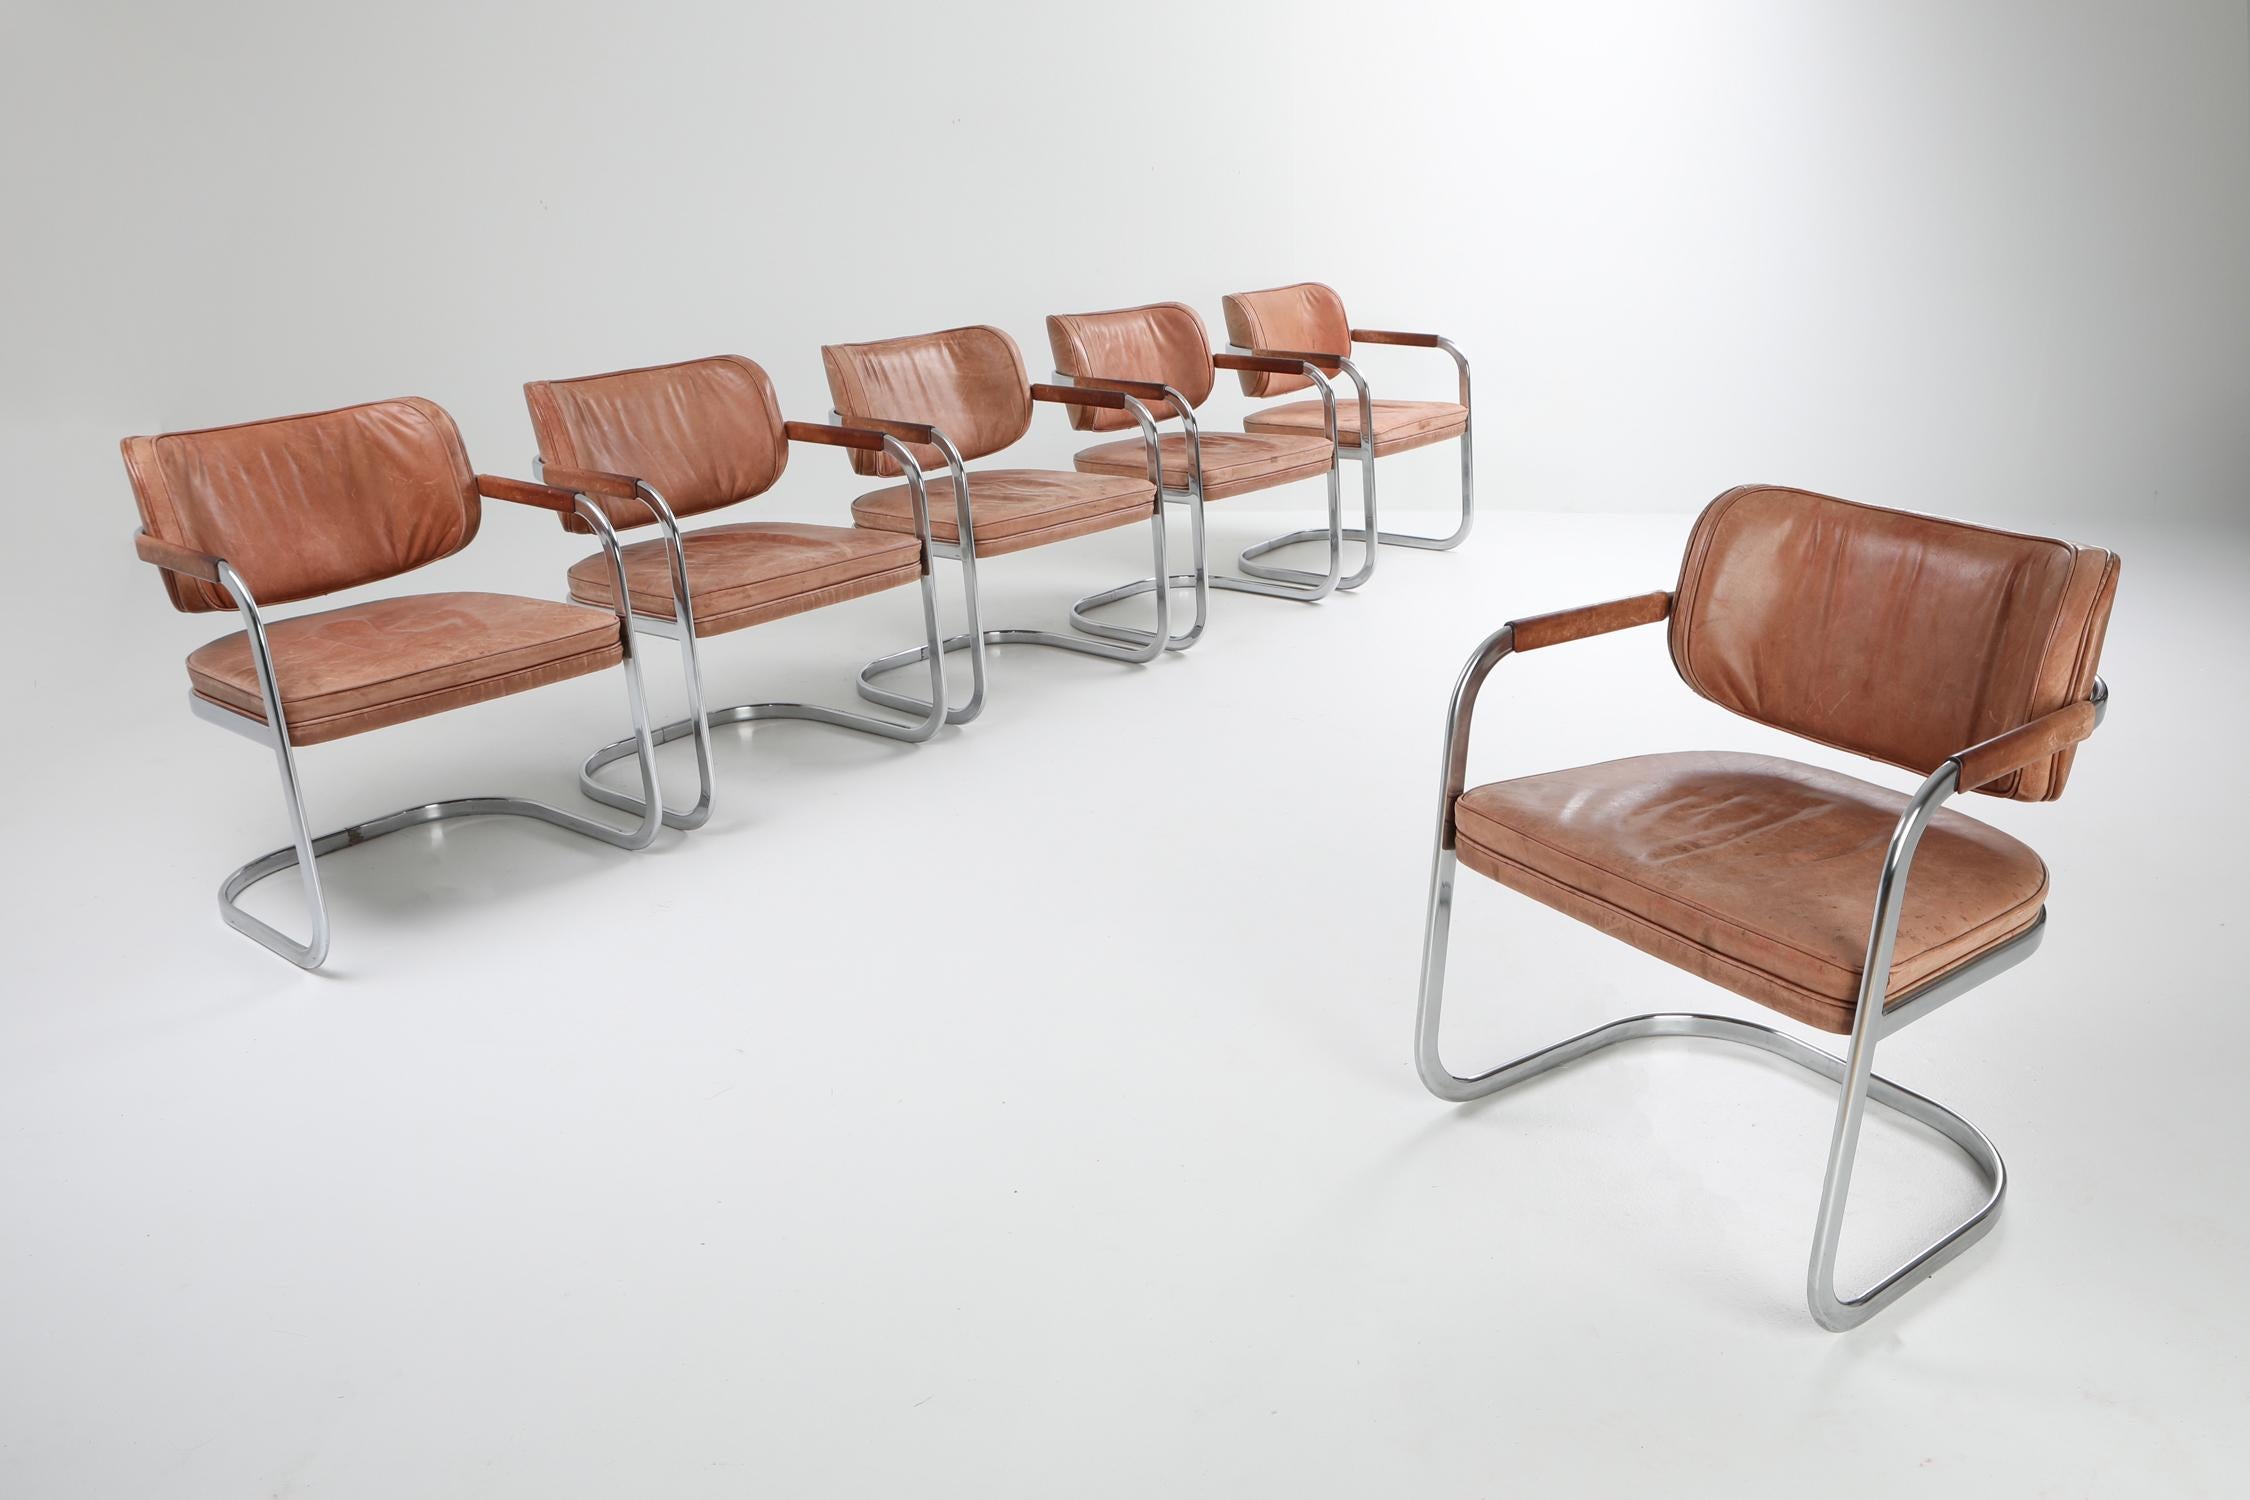 Mid-Century Modern chic set of armchairs in patinated leather and chrome by Walter Knoll, 1970s.

High quality armchairs in cognac leather which can be used as conference, dining or desk chairs.
Very modern minimalistic look in contrast with the